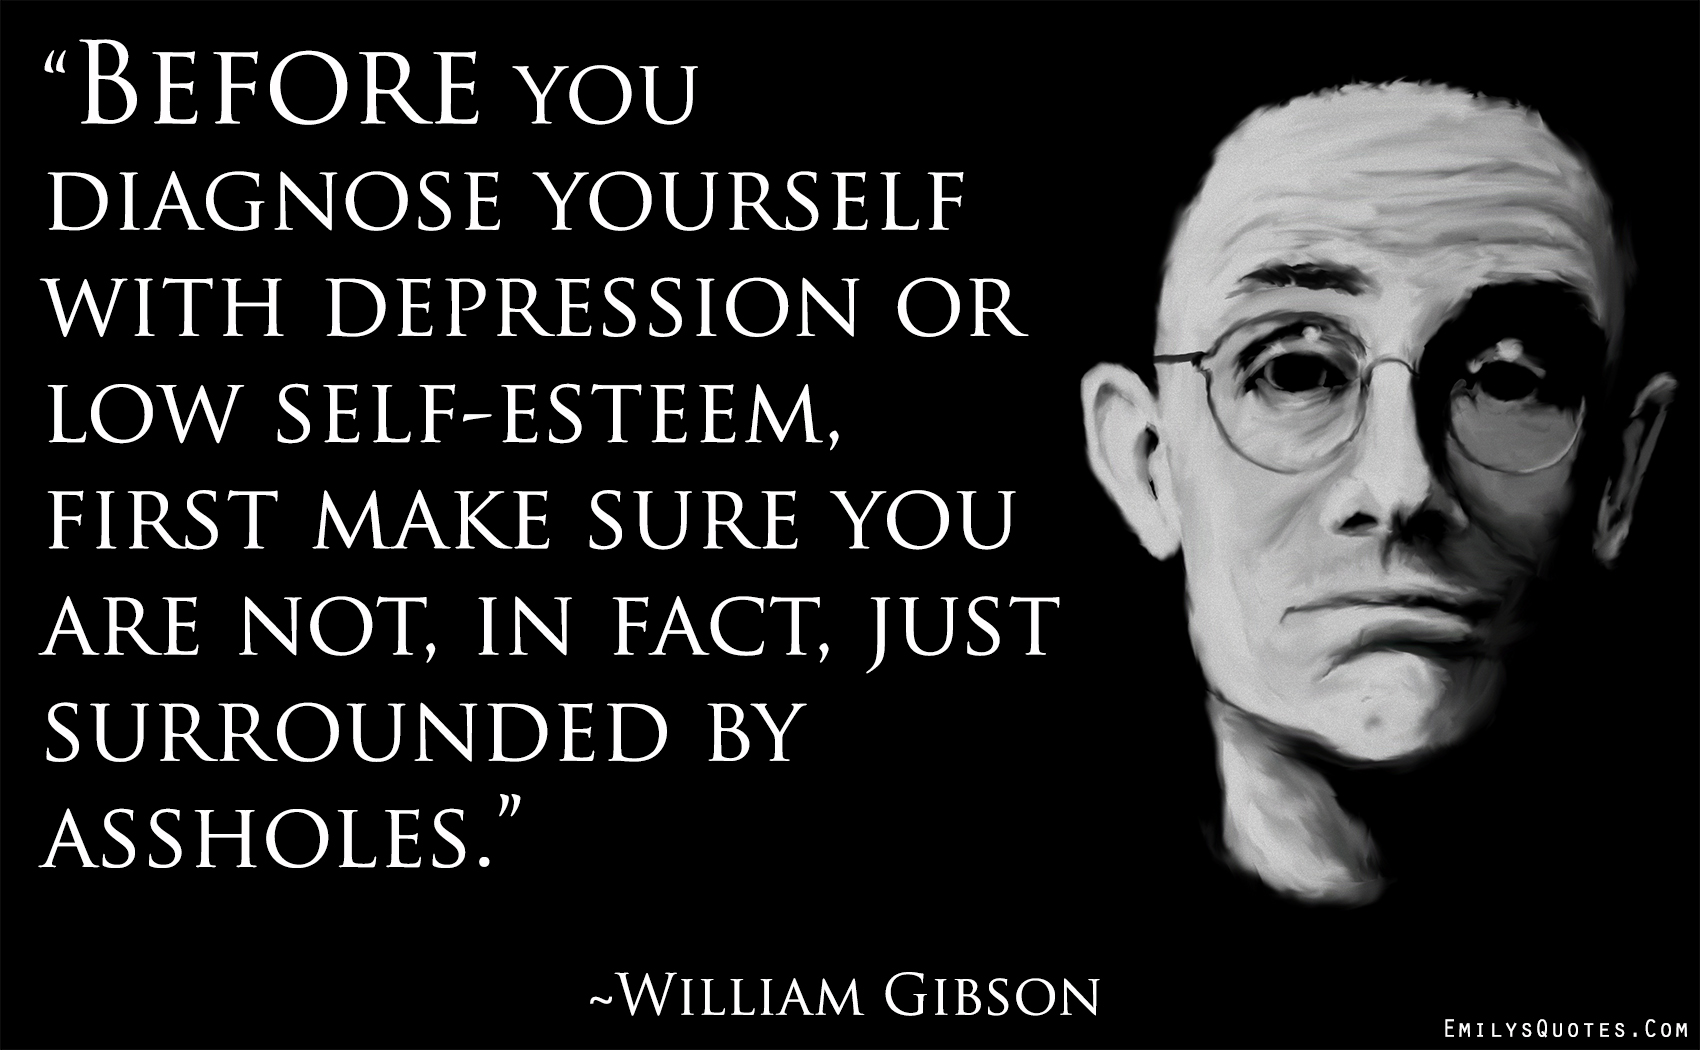 Before you diagnose yourself with depression or low self-esteem, first make  sure you are not, in fact, just surrounded by assholes | Popular  inspirational quotes at EmilysQuotes